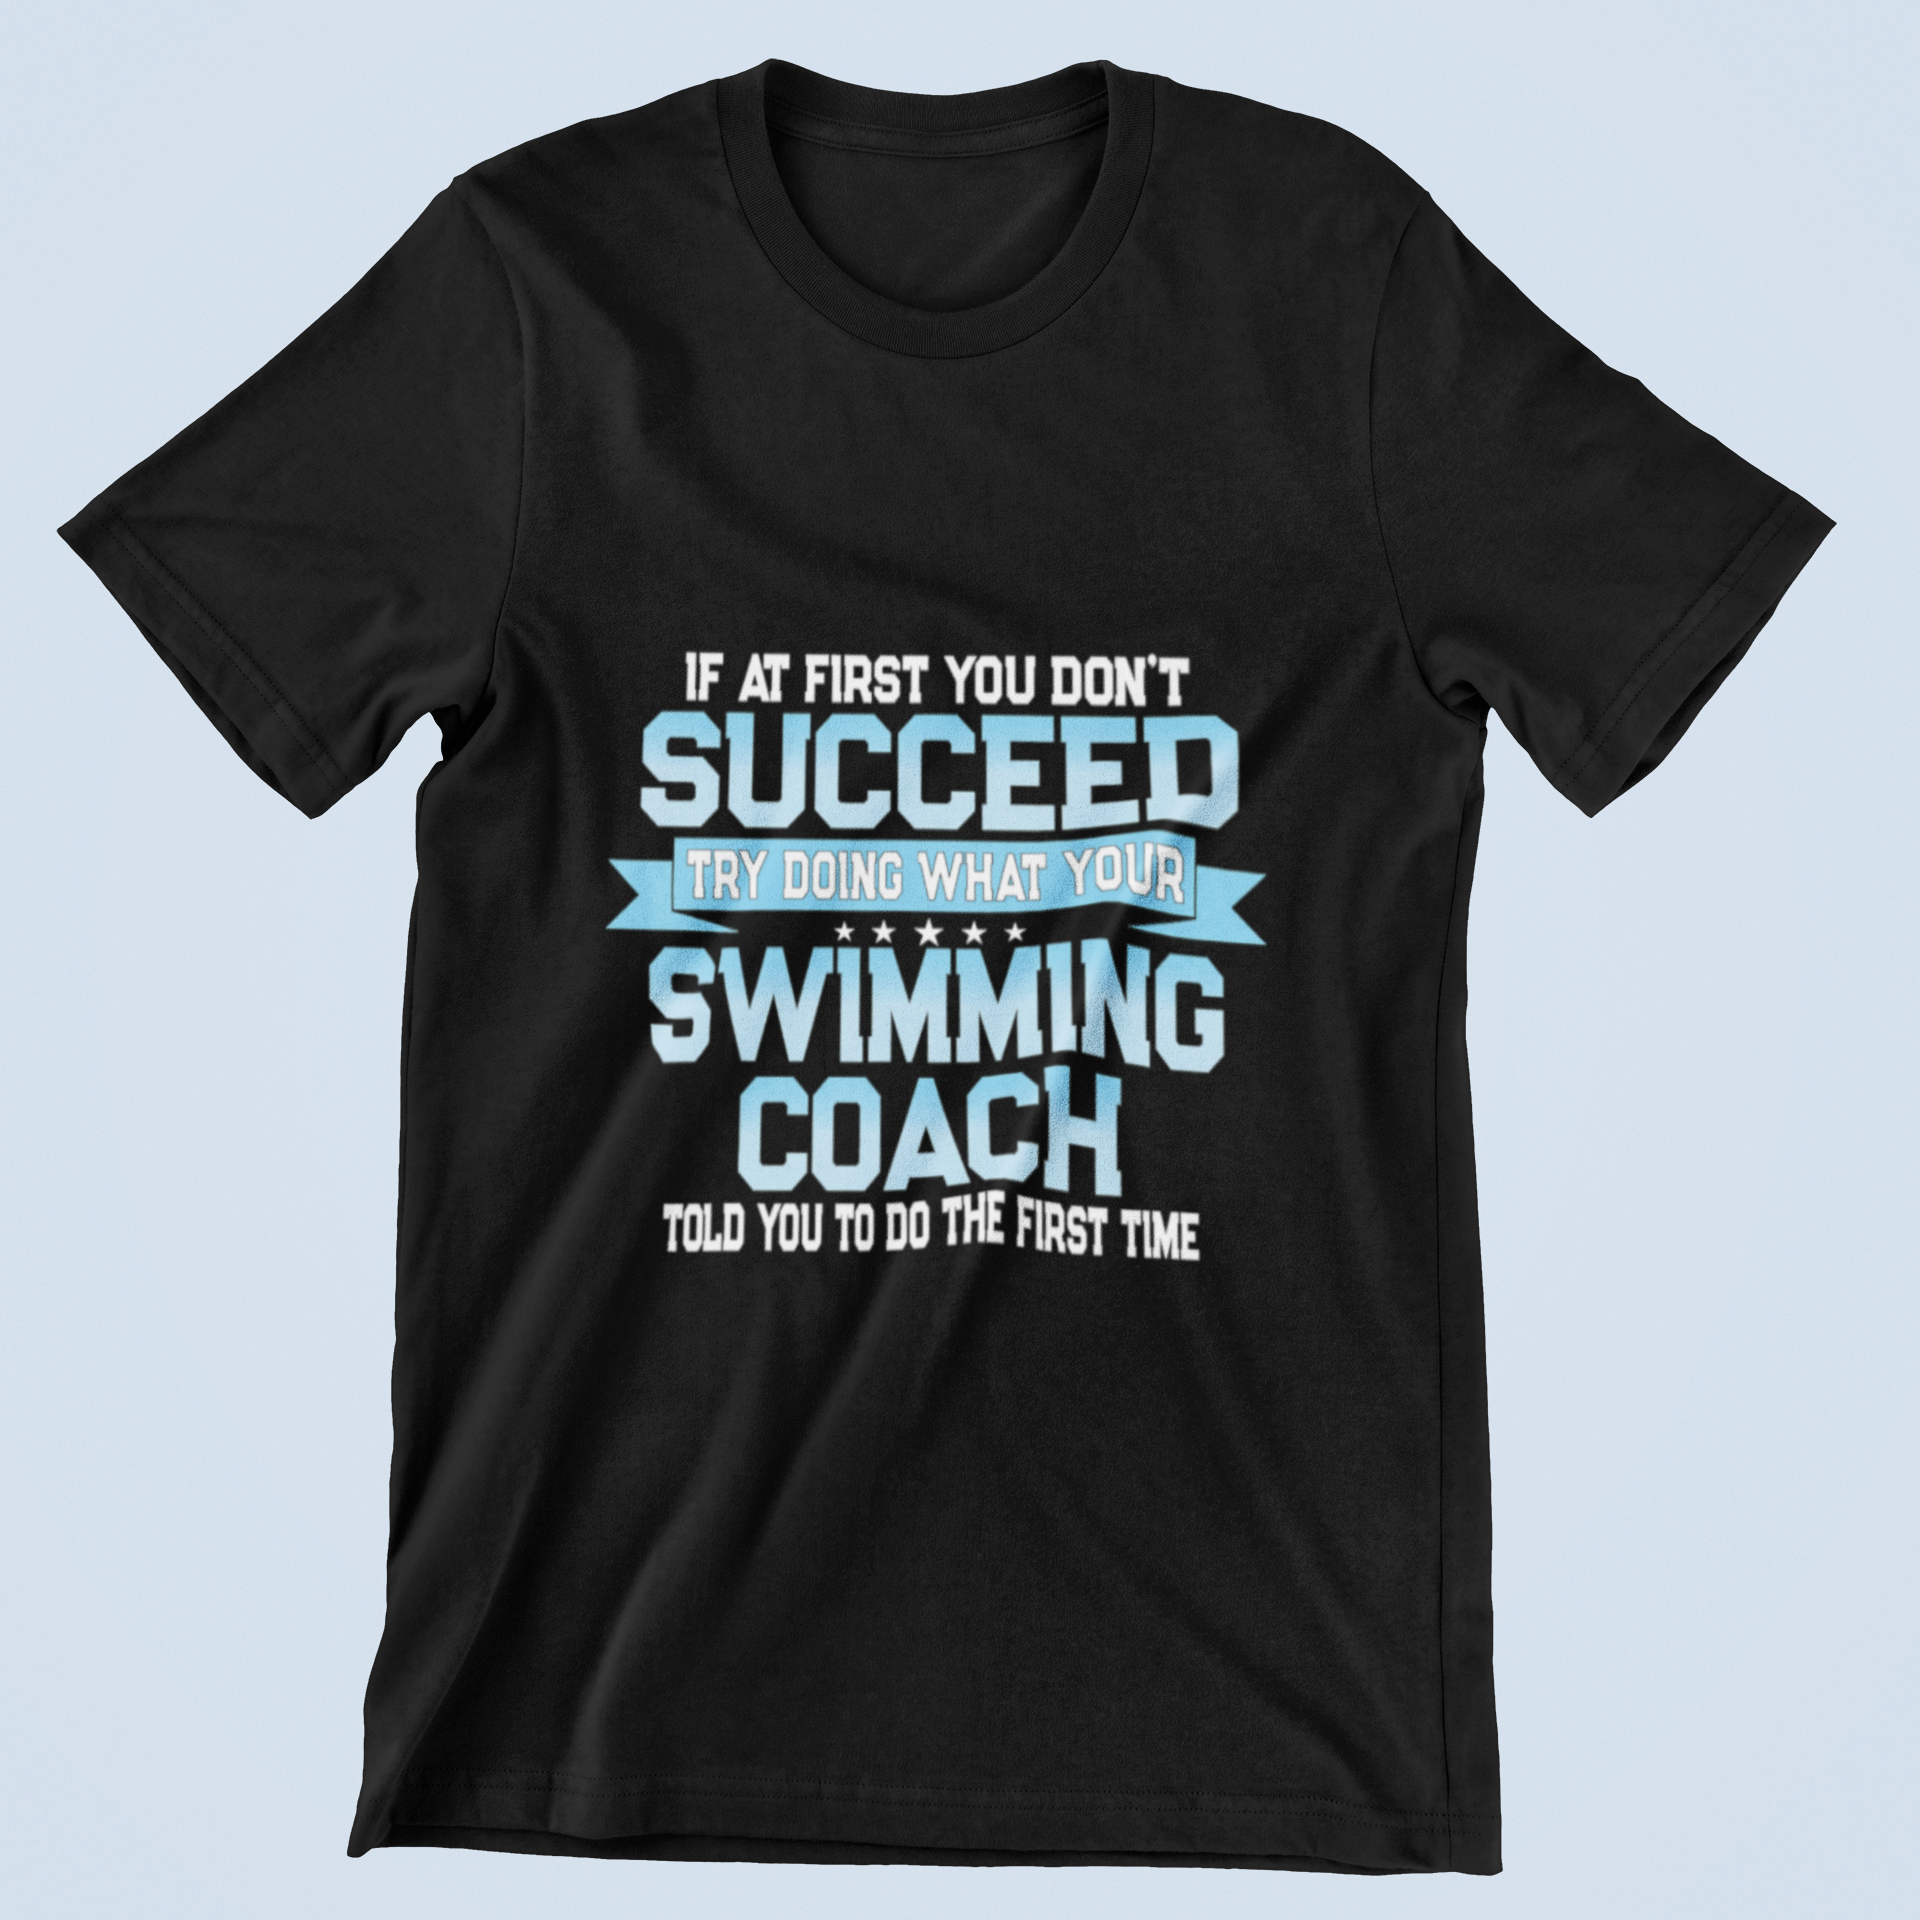 Swimming Is Importanter Funny Swimmers Lover Gift T-Sh1. 110 Swimming Is Importanter Funny Swimmers (Copy)